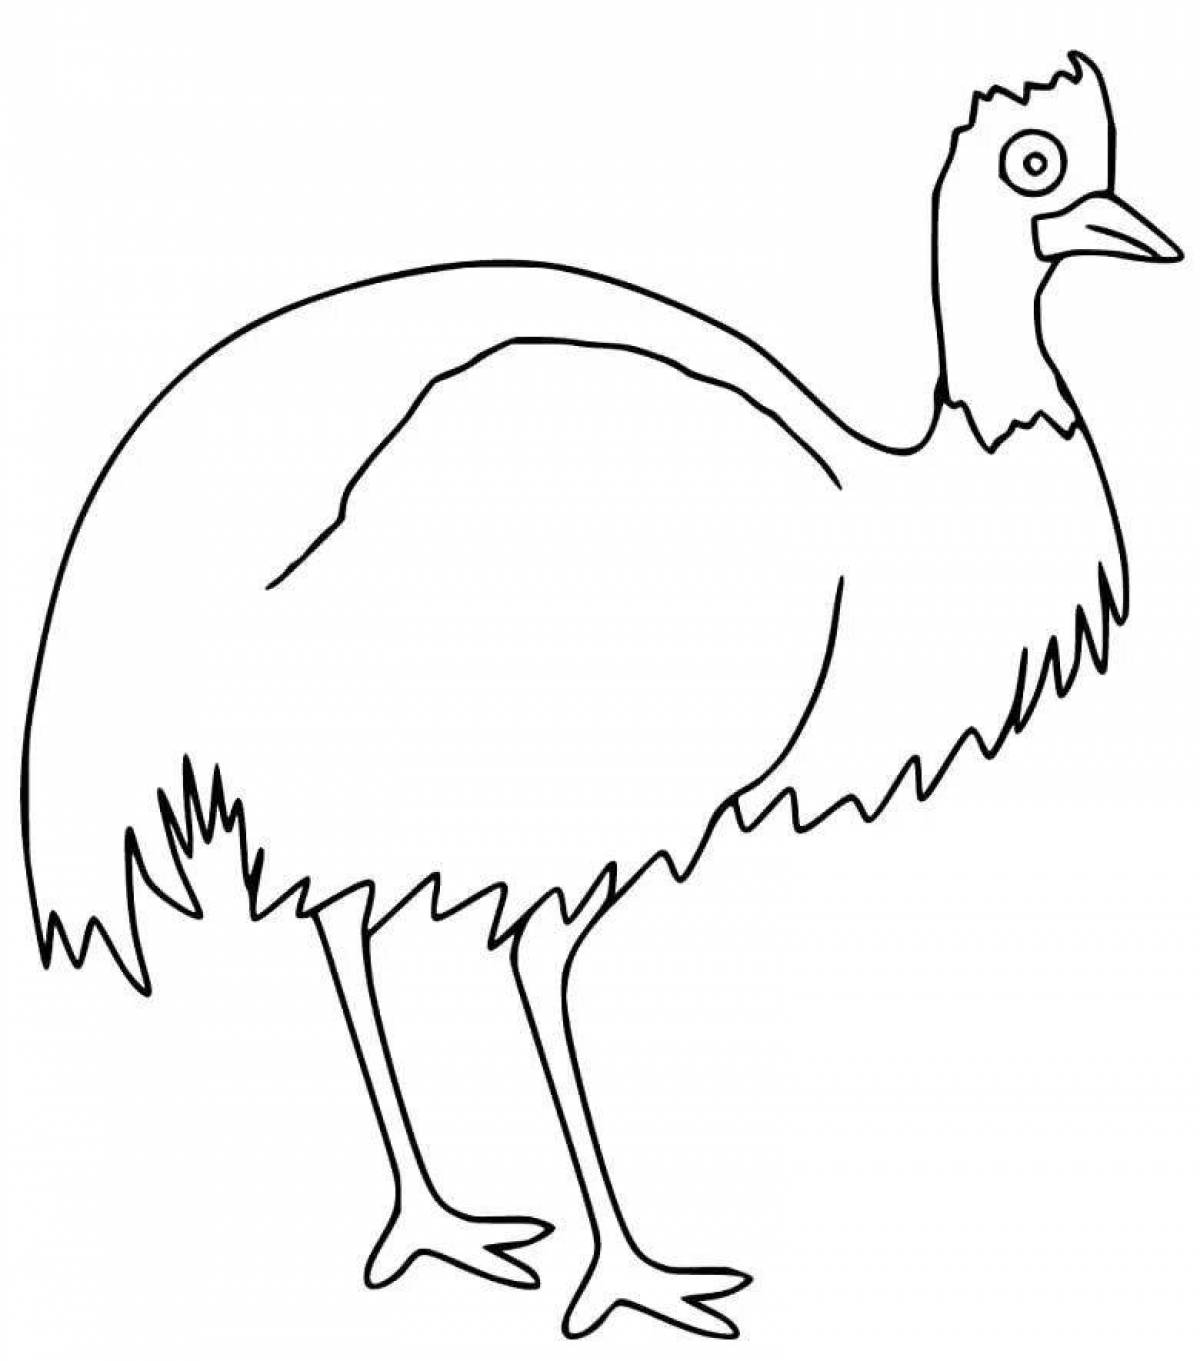 Fat emu coloring page